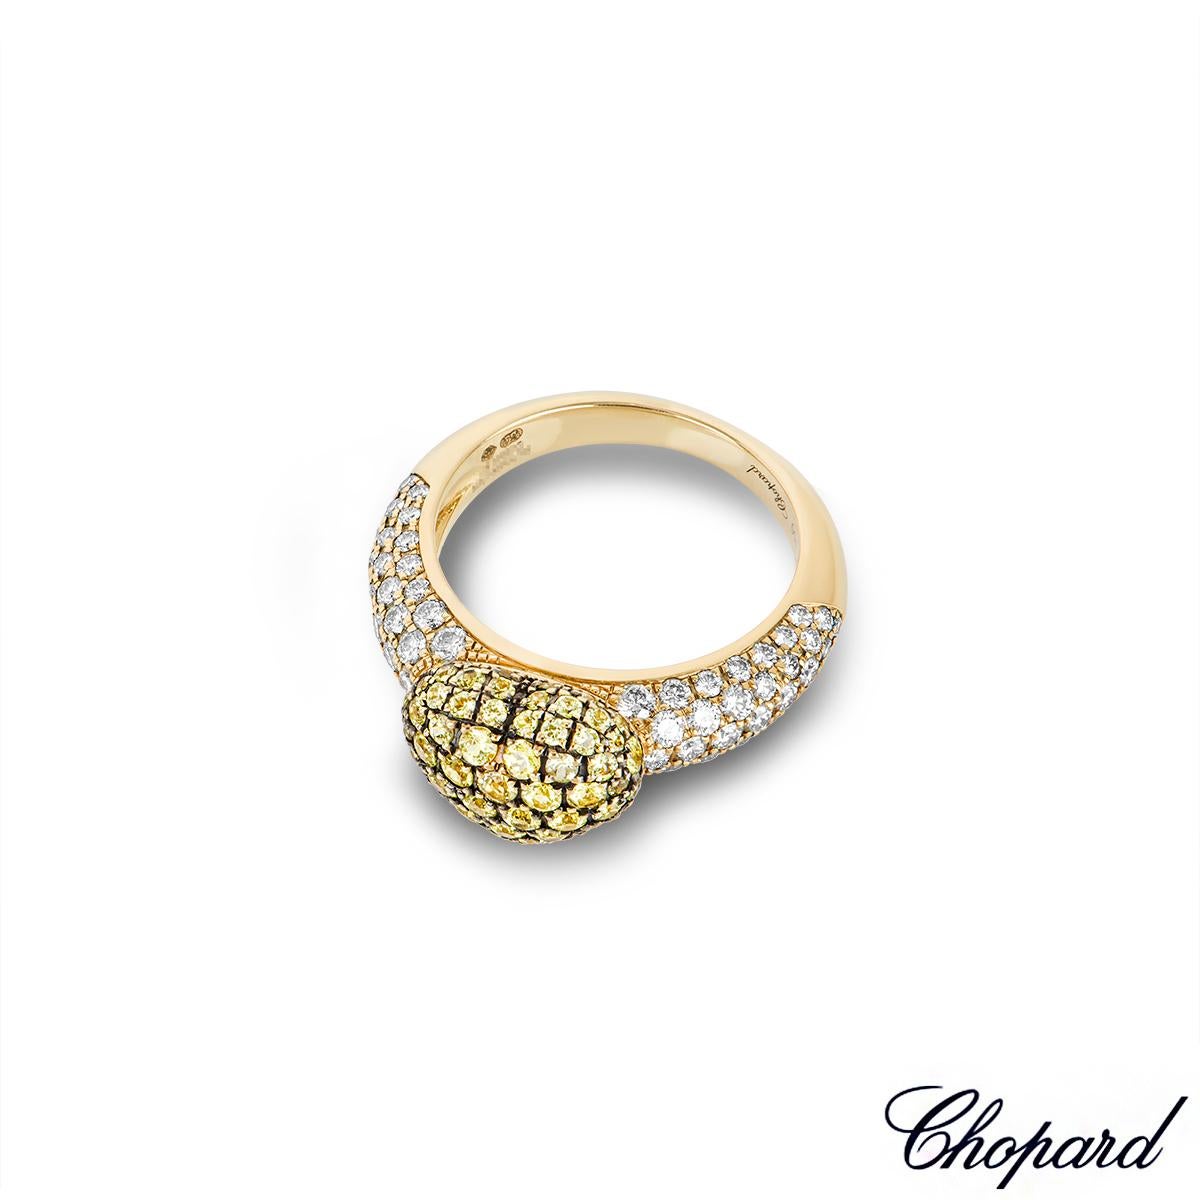 Chopard Yellow Gold Diamond Heart Ring 82/4513-0111 In New Condition For Sale In London, GB